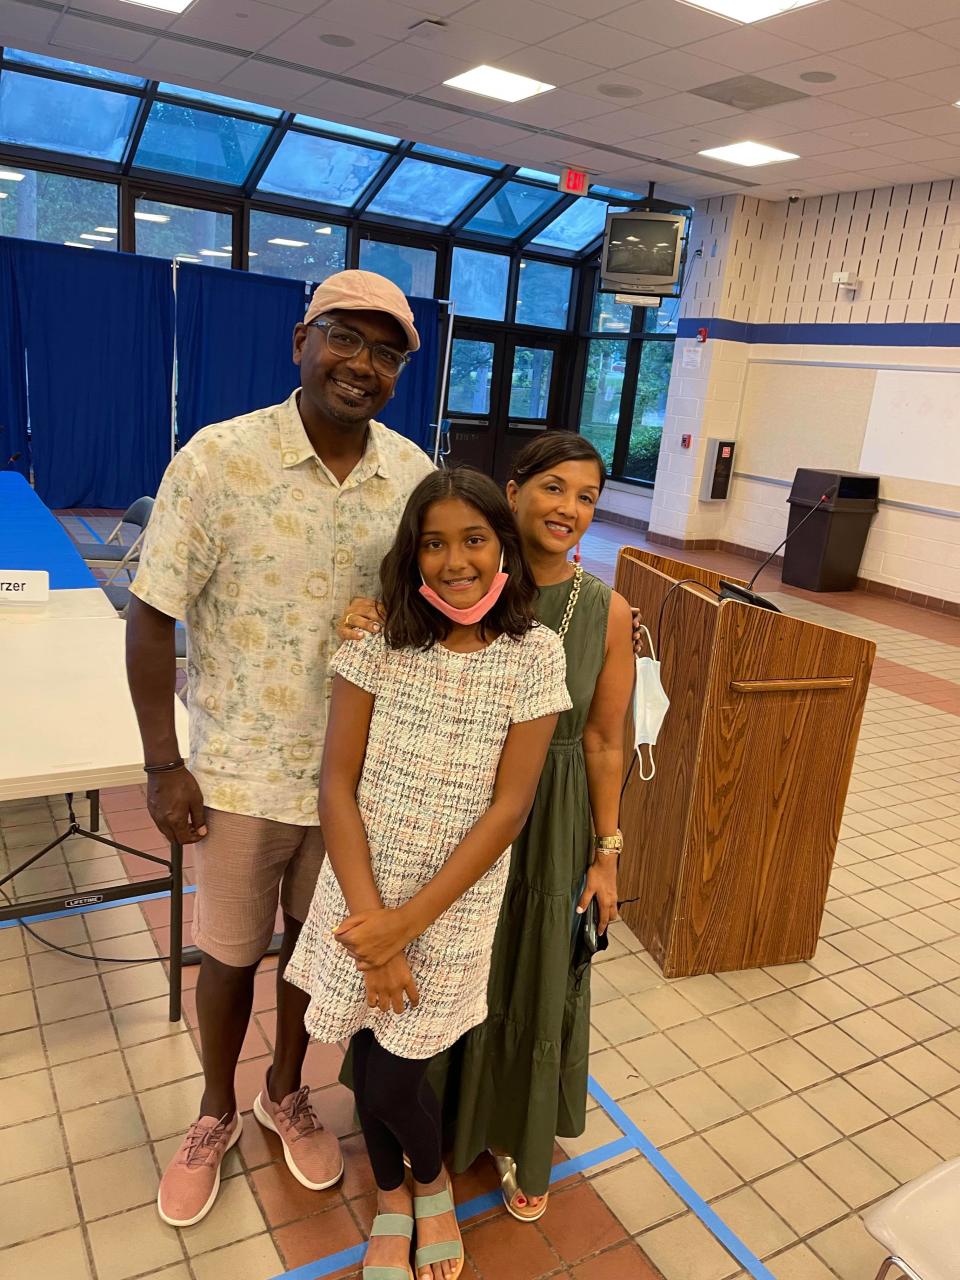 Laila Khan with her parents Saiful Khan and Neha Shah at a June, 2021 Montclair Board of Education meeting. She aksed the BOE to make the Muslim holiday Eid al-Fitr a school holiday.